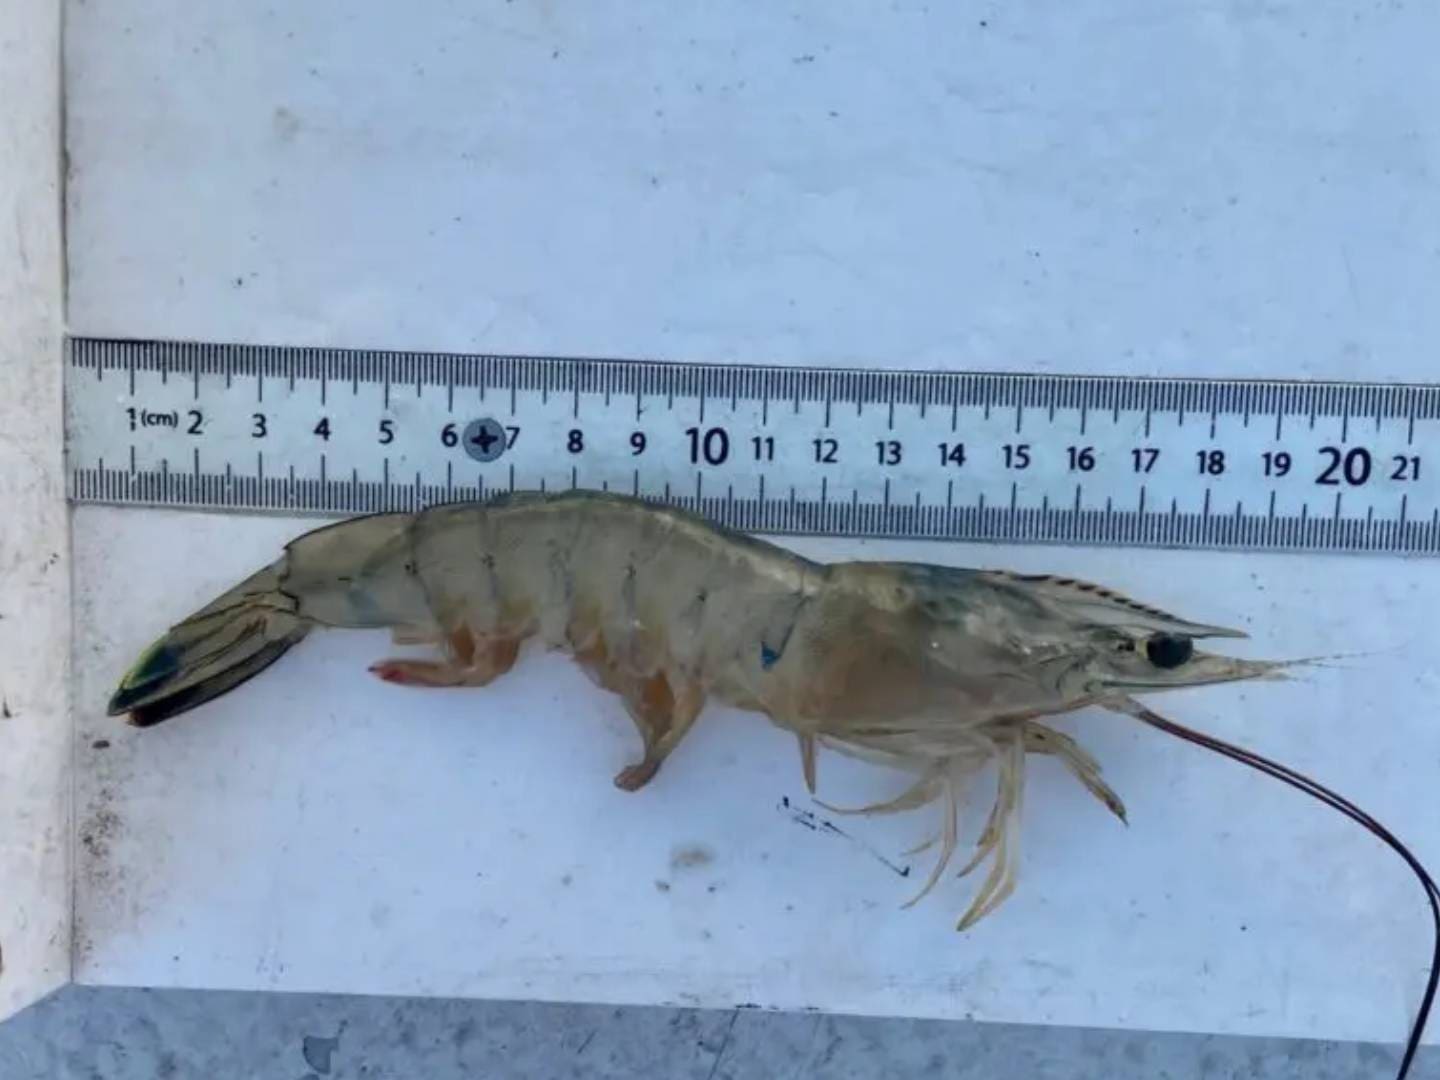 A large shrimp is shown next to a ruler.